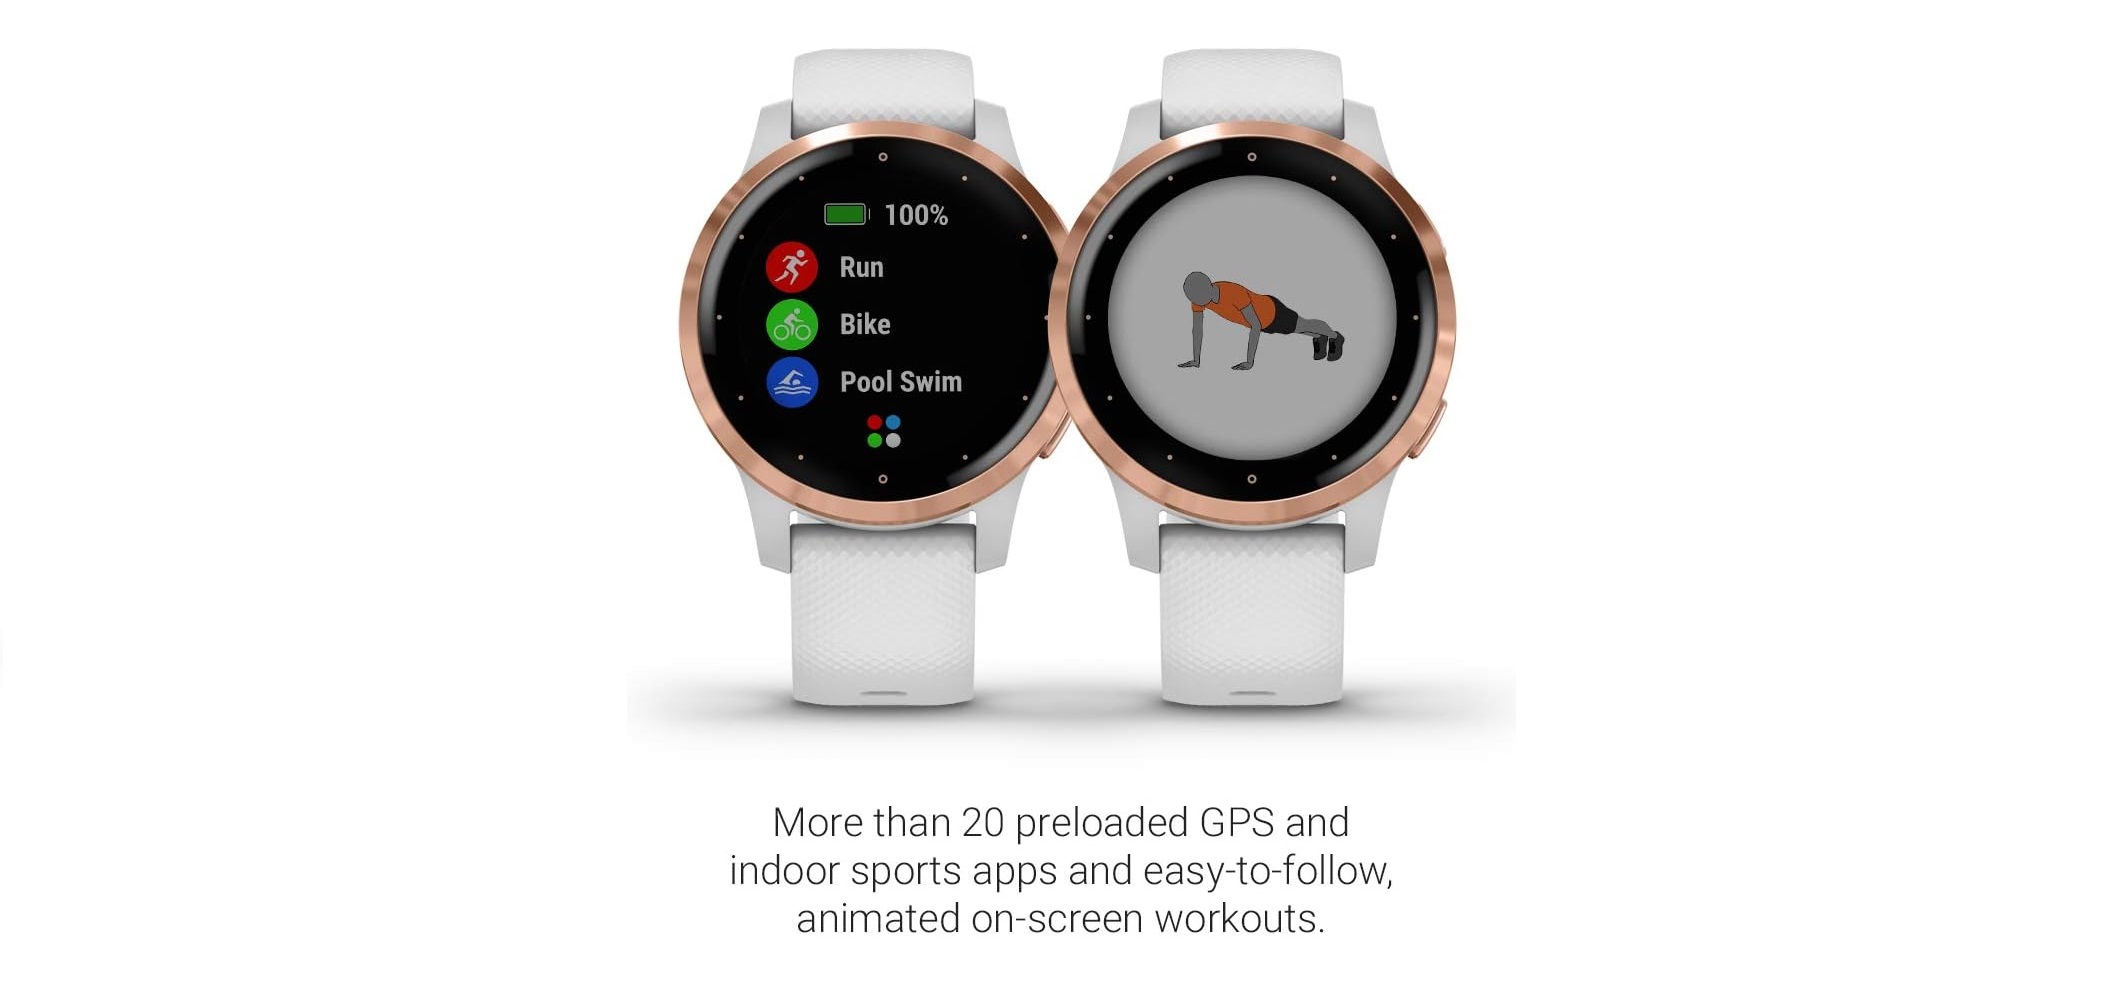 Garmin Smart Watch - One of The Top 10 Christmas Gift Ideas for Women